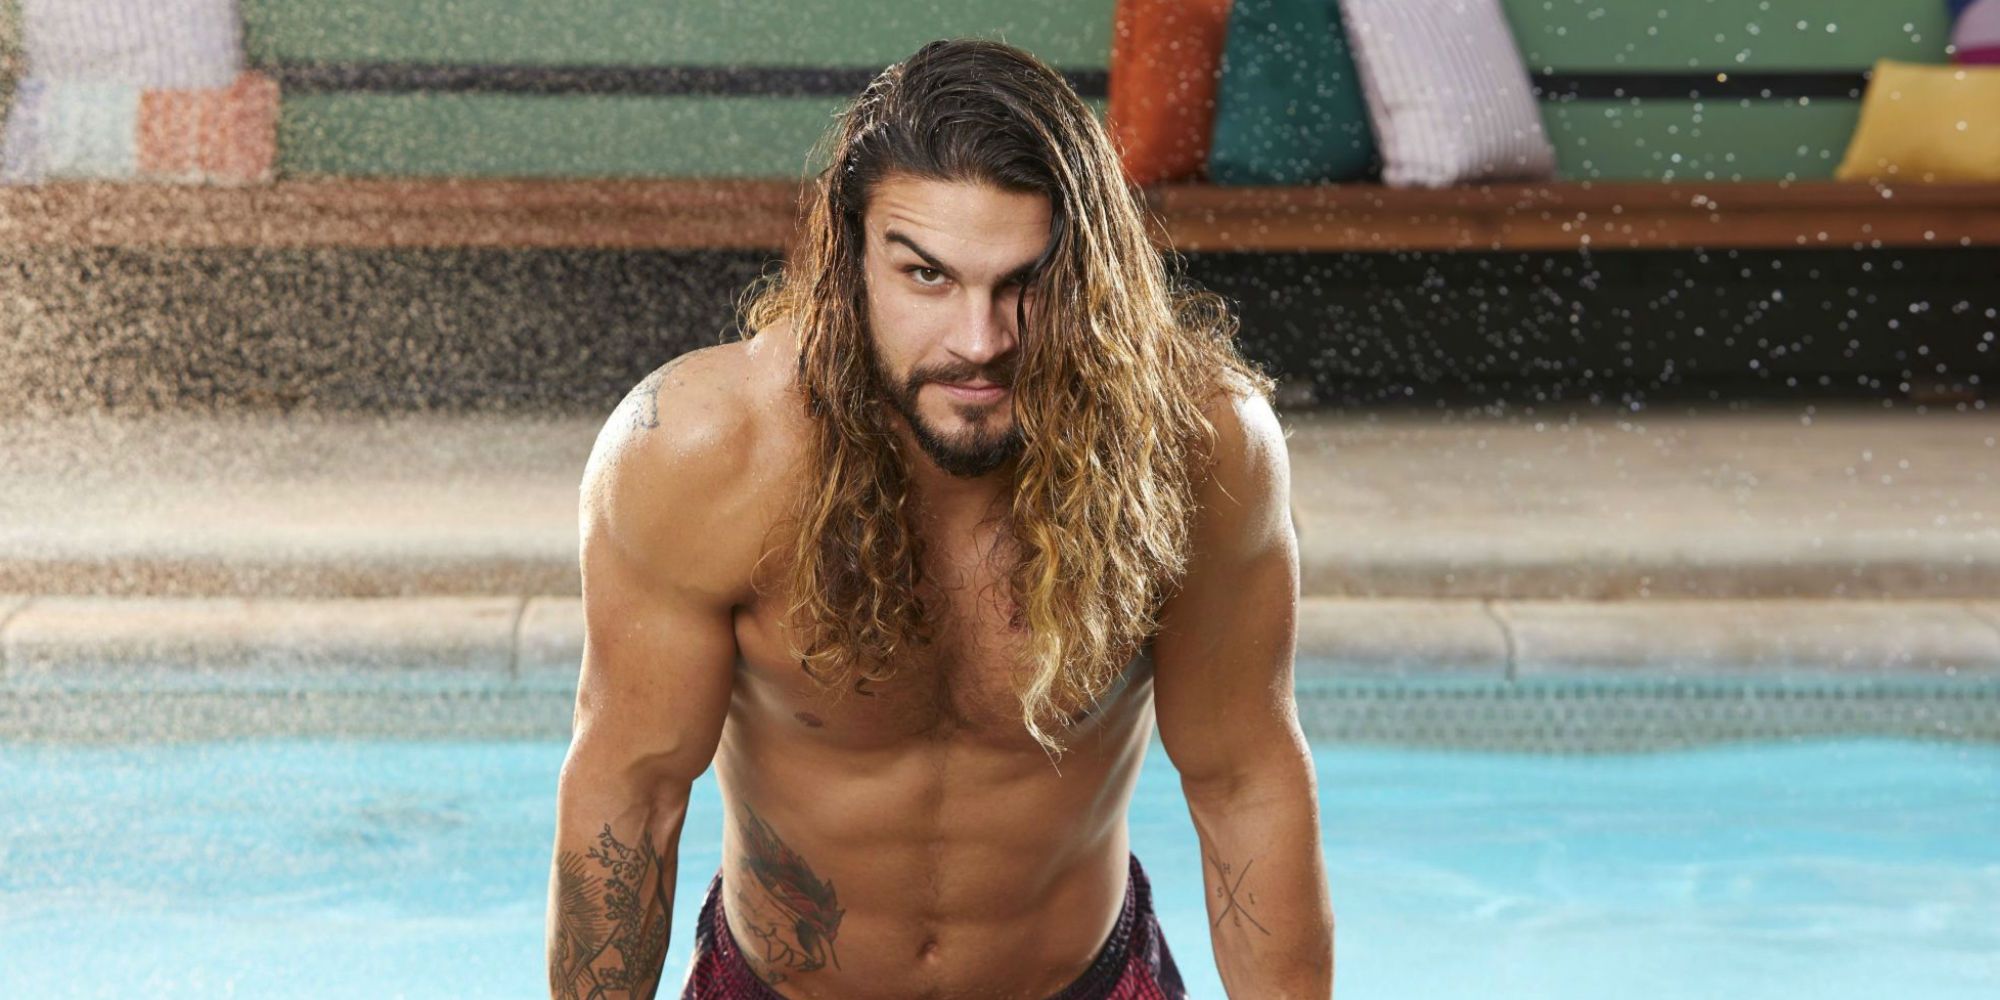 Jack Matthews coming out of a pool in Big Brother 21